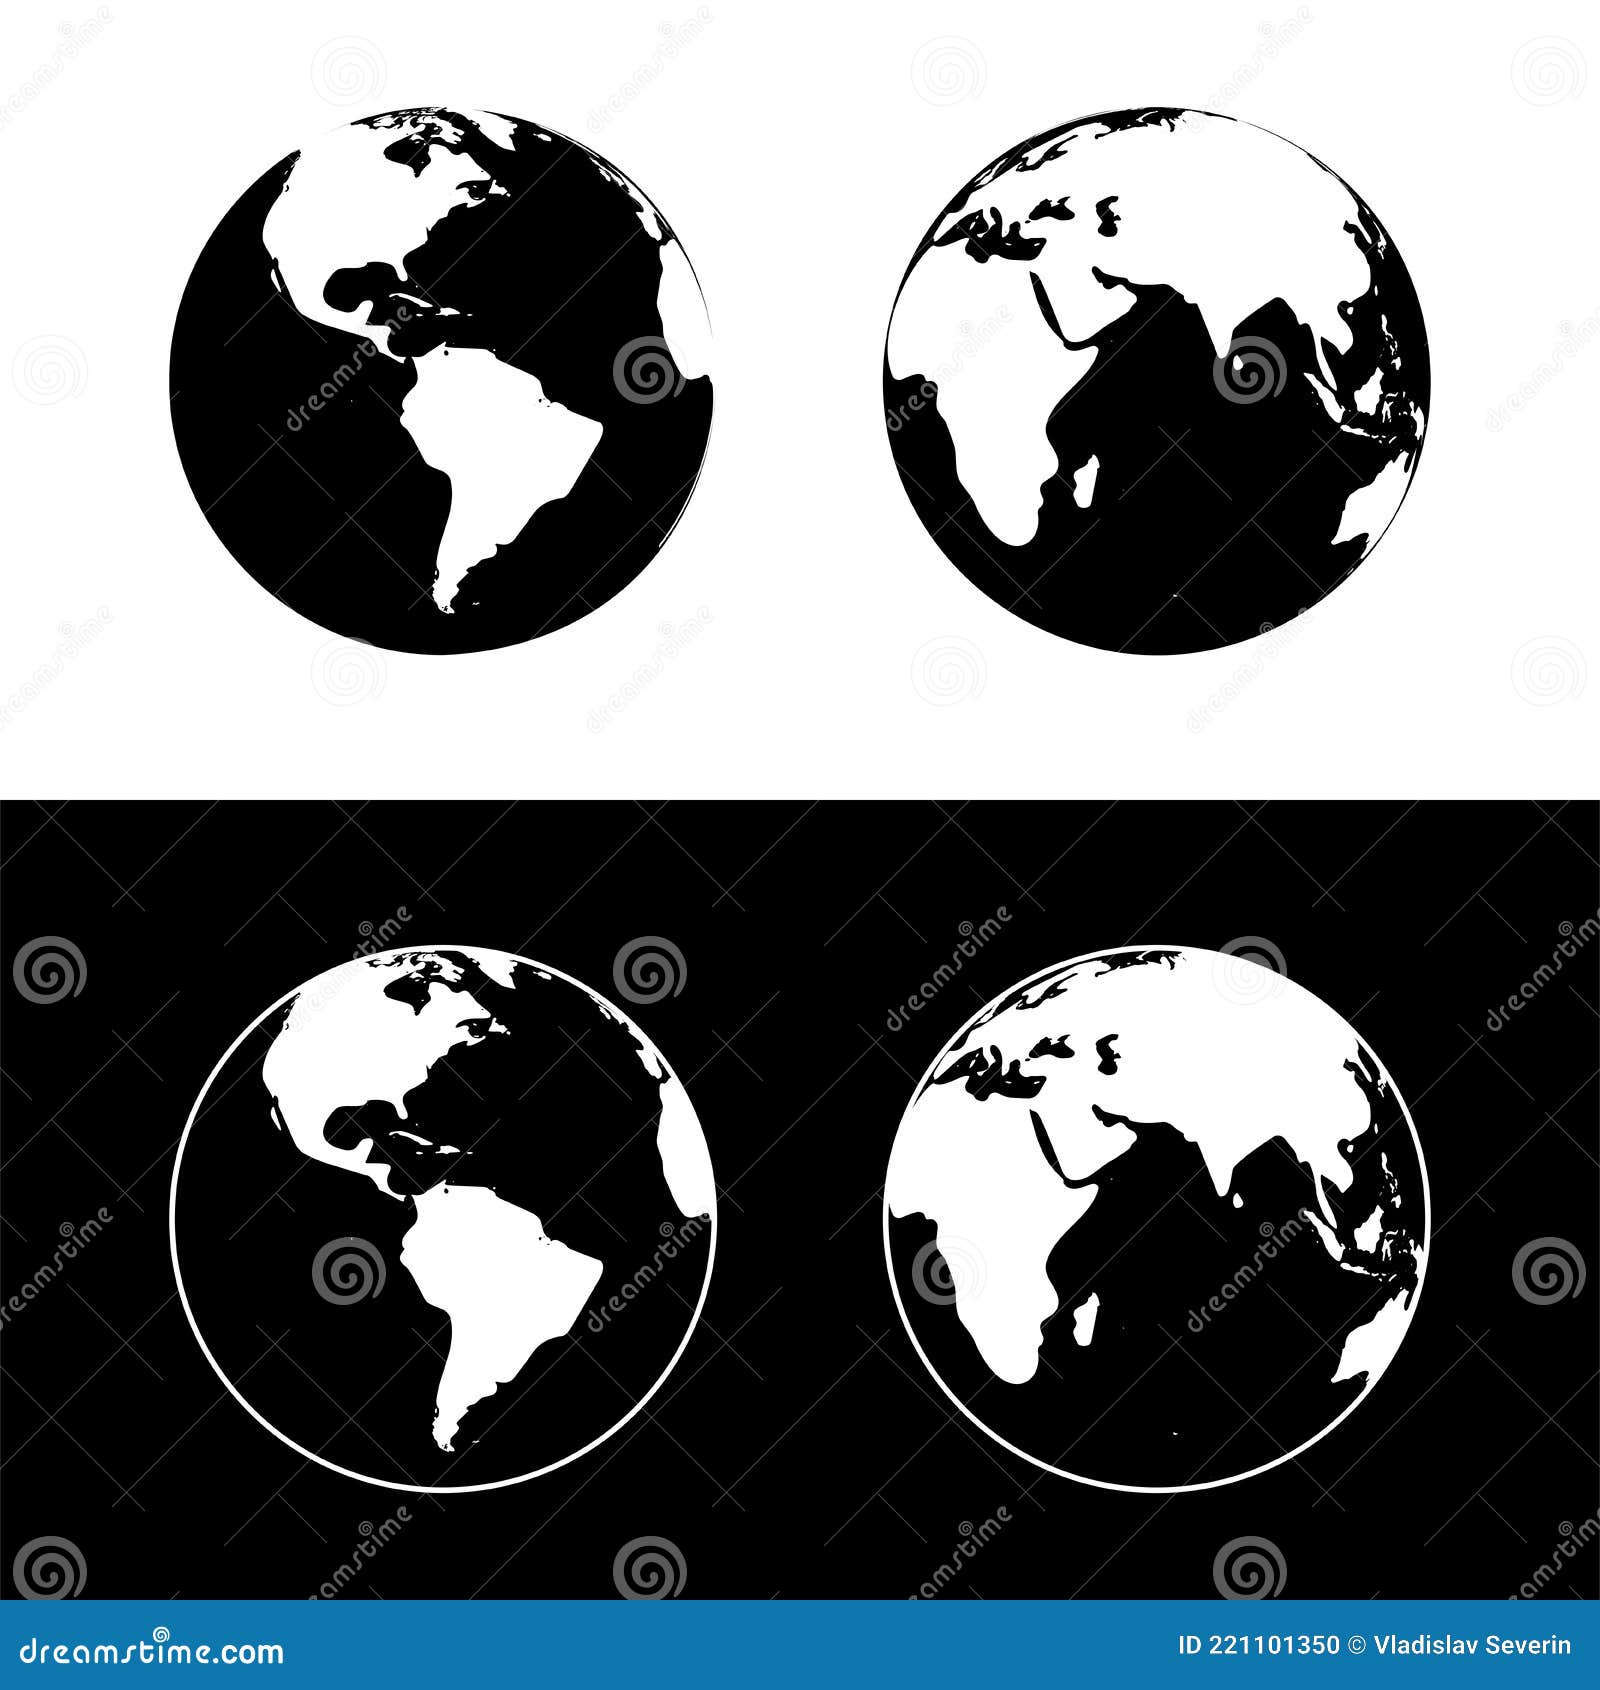 Vector Illustration of the Planet Earth Stock Vector - Illustration of ...